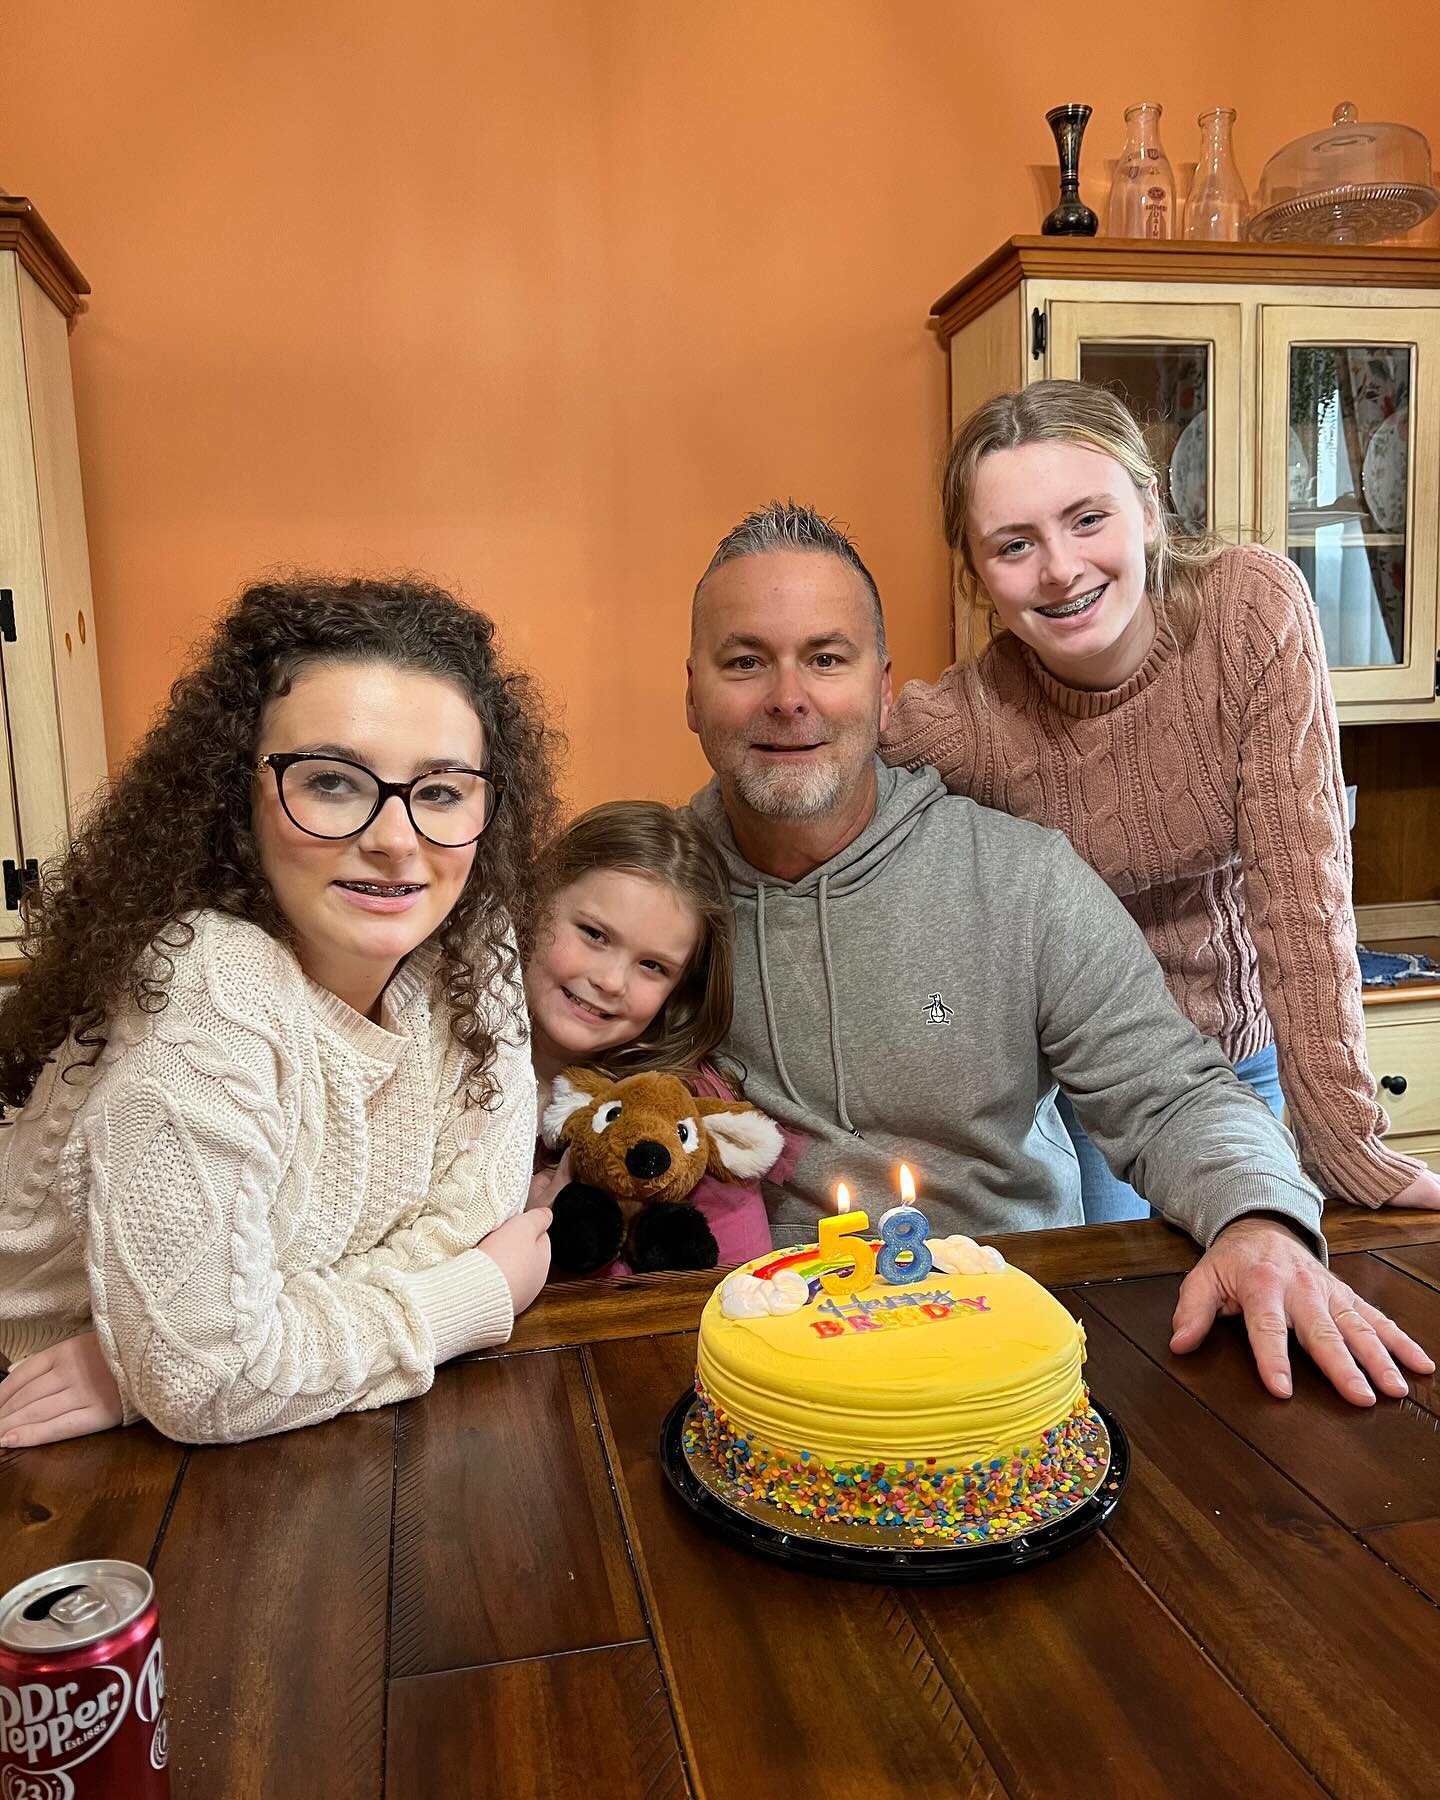 Poppaw Jeff recently celebrated his 58th birthday with Remi and the twins